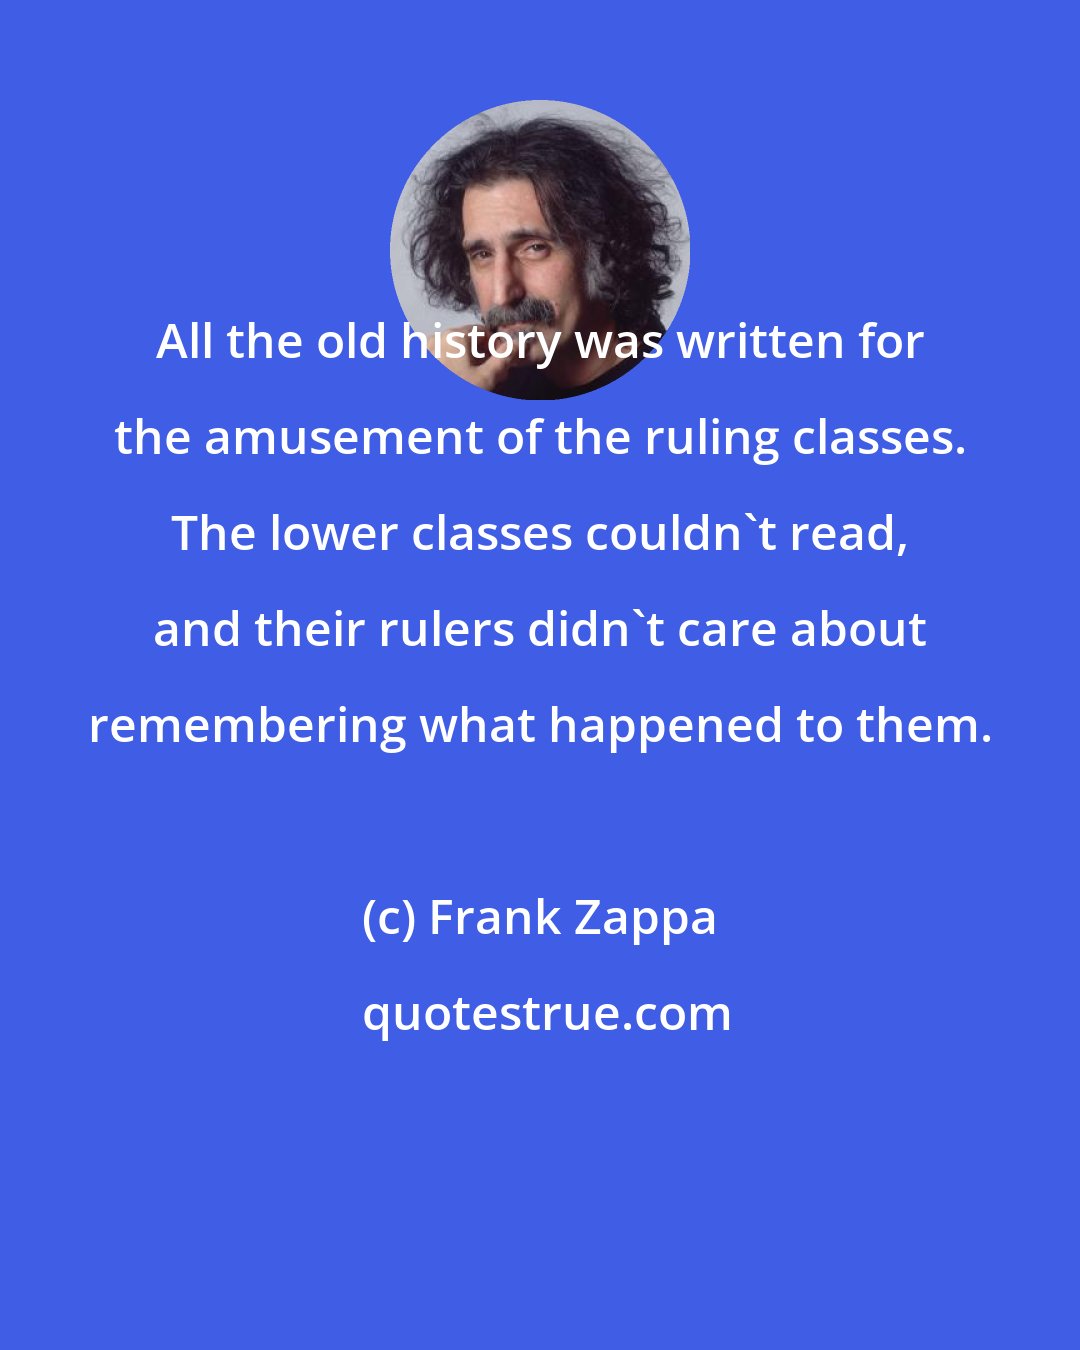 Frank Zappa: All the old history was written for the amusement of the ruling classes. The lower classes couldn't read, and their rulers didn't care about remembering what happened to them.